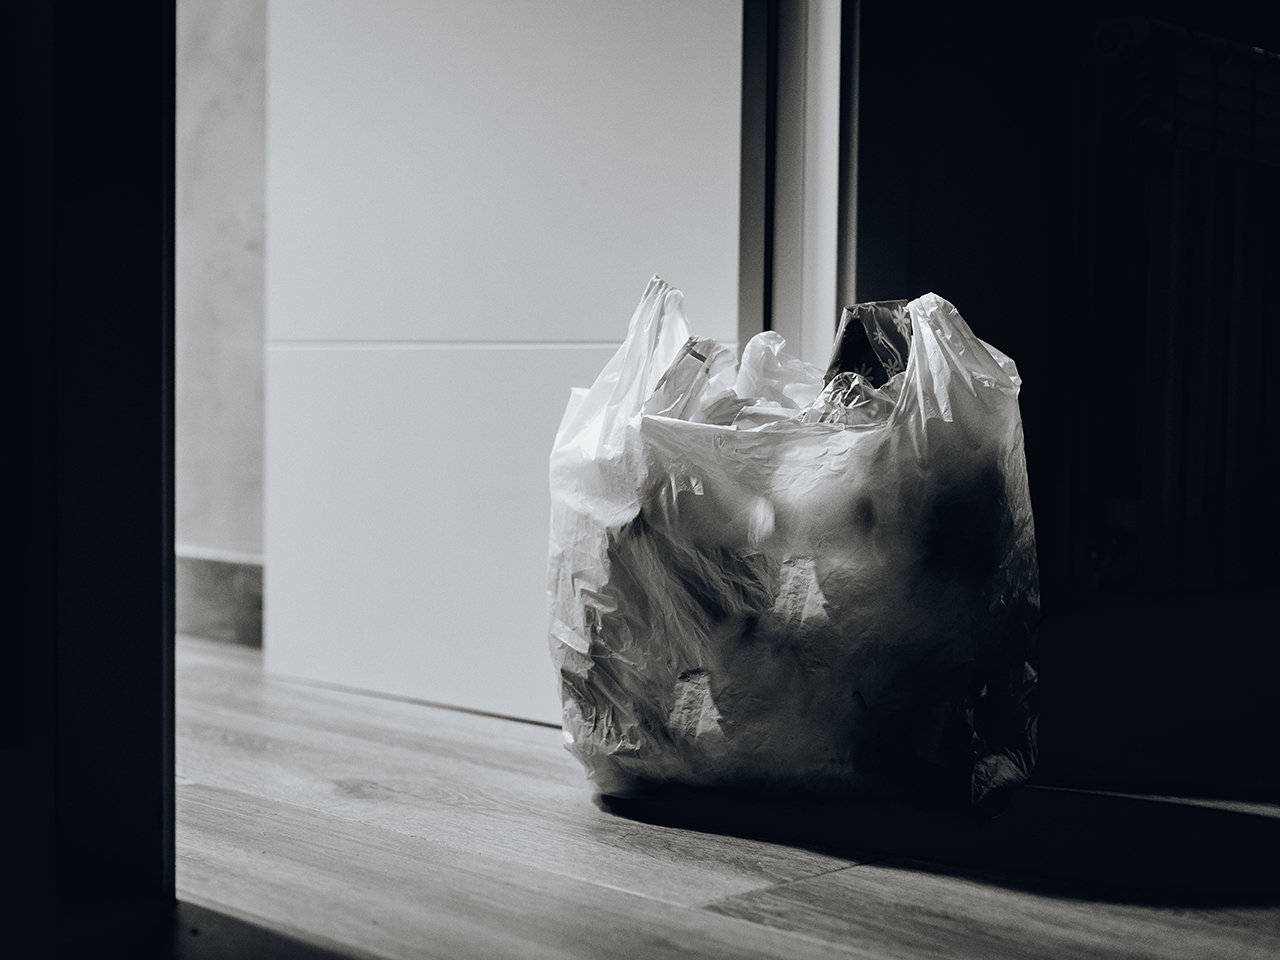 reuse single-use plastics: black and white grocery bag of garbage by door